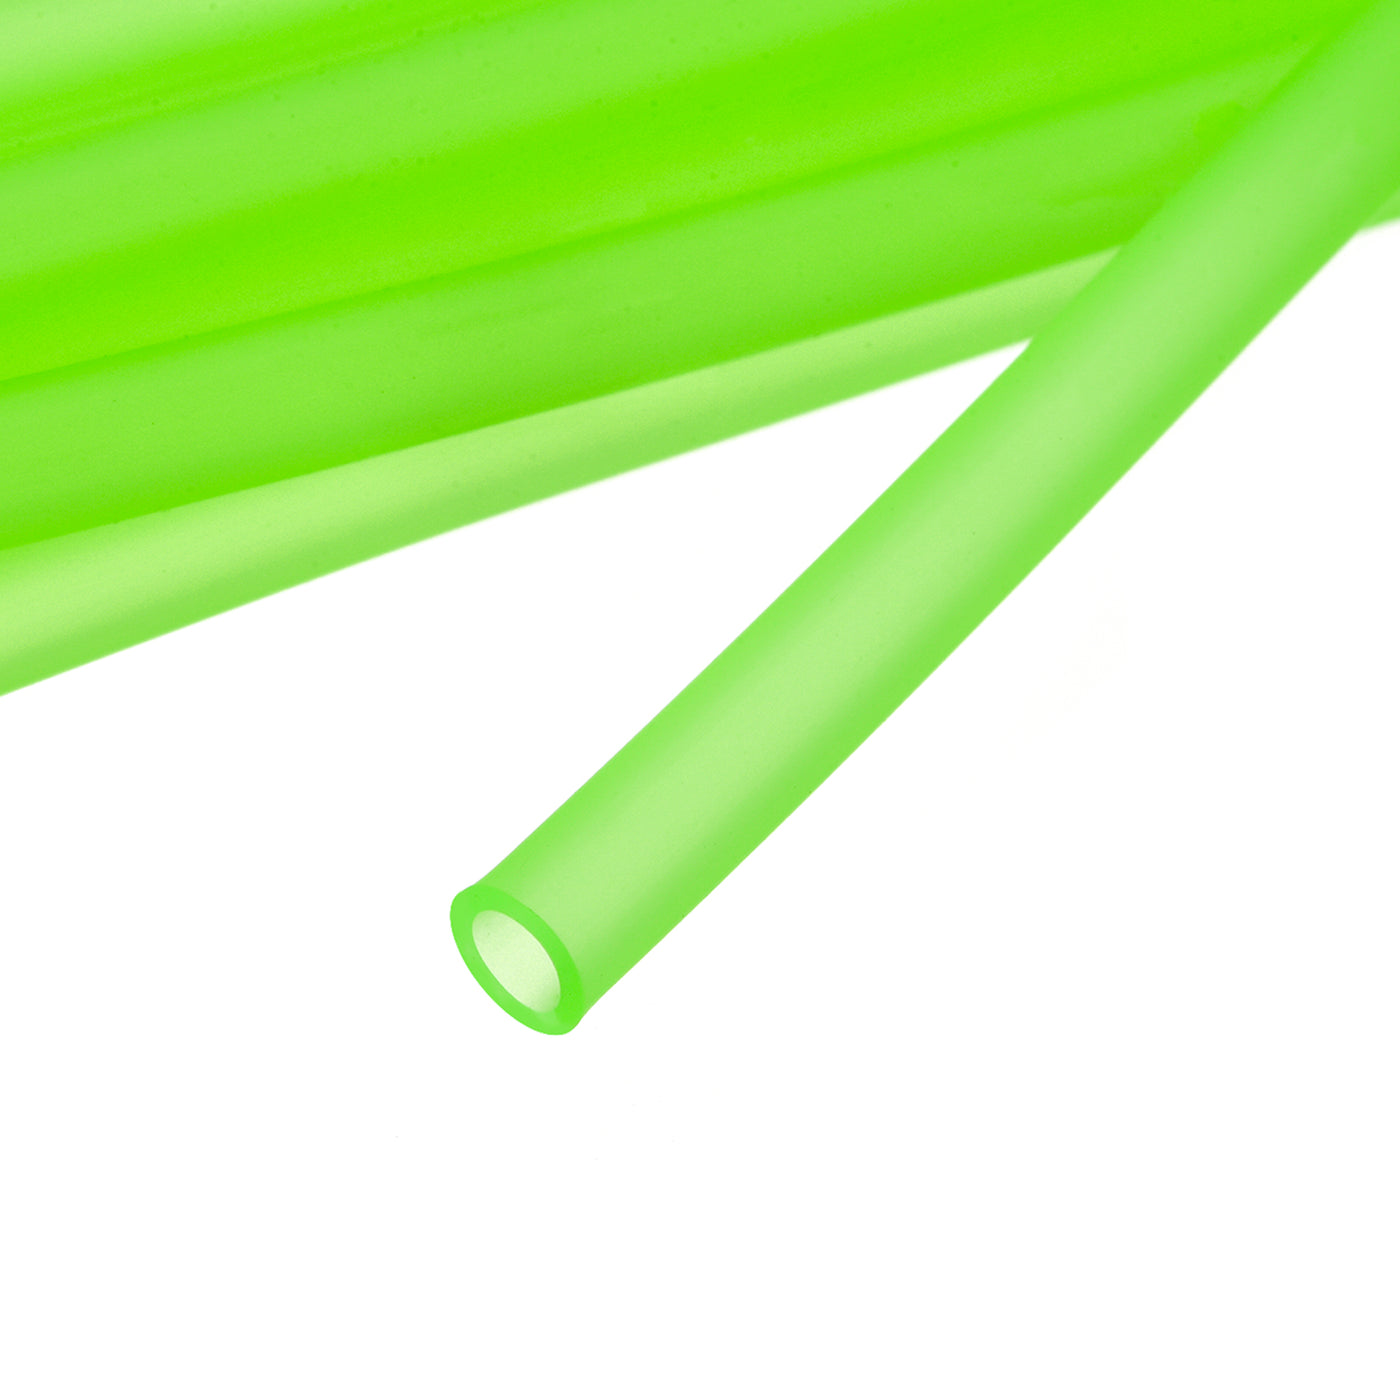 uxcell Uxcell Silicone Tubing 5/32" ID, 15/64" OD 4Pcs 13.12 Ft for Pump Transfer, Green